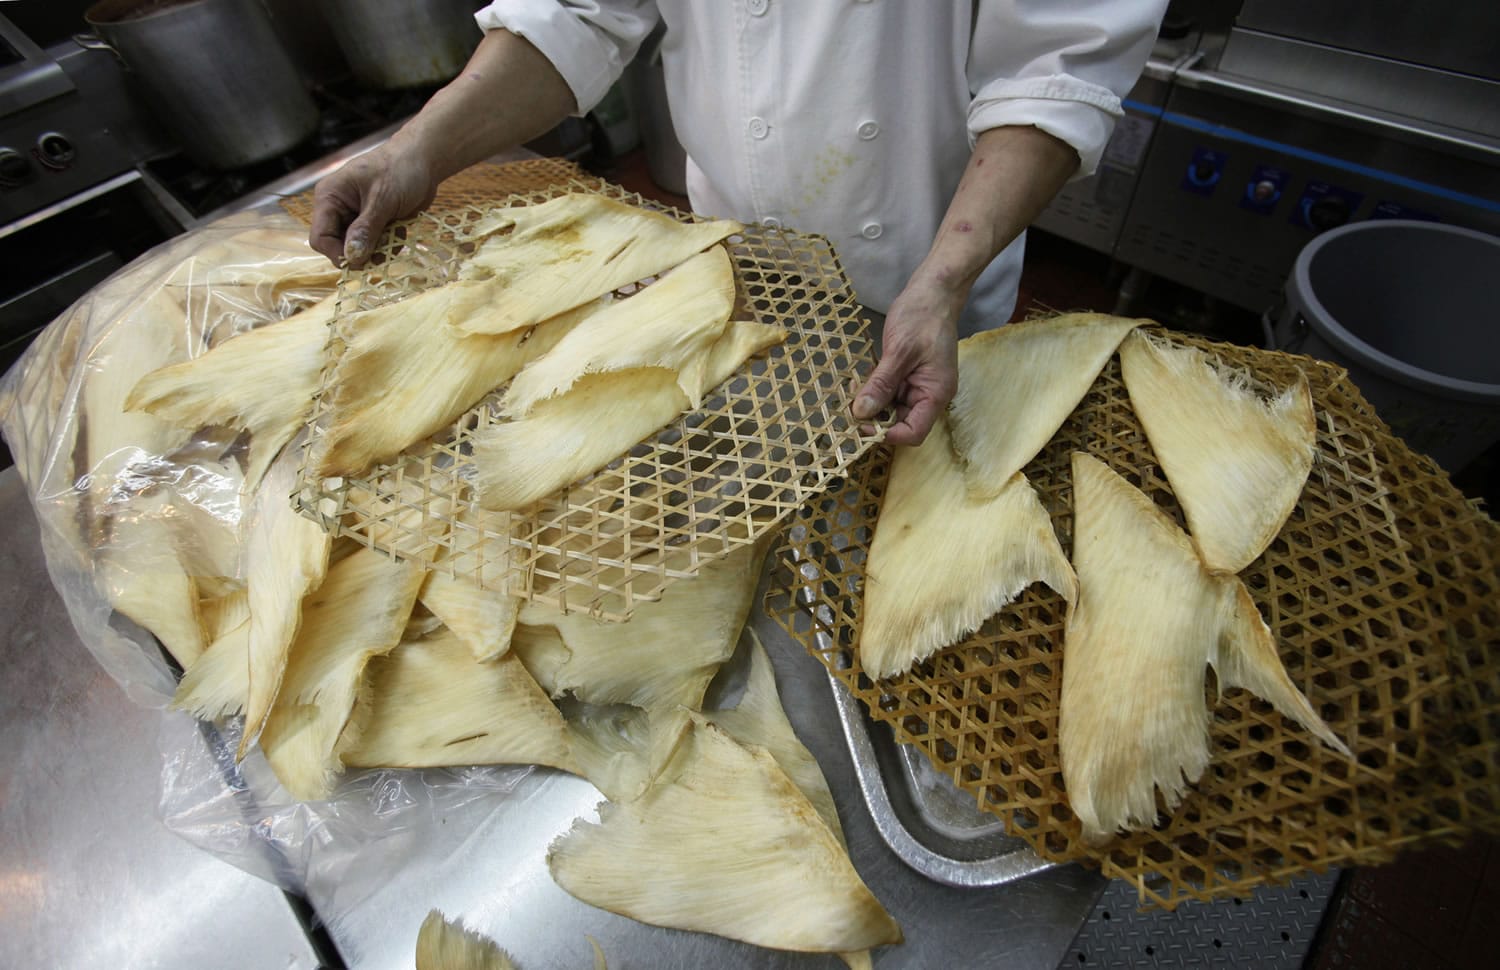 A chef in Hong Kong prepares shark fins for cooking.